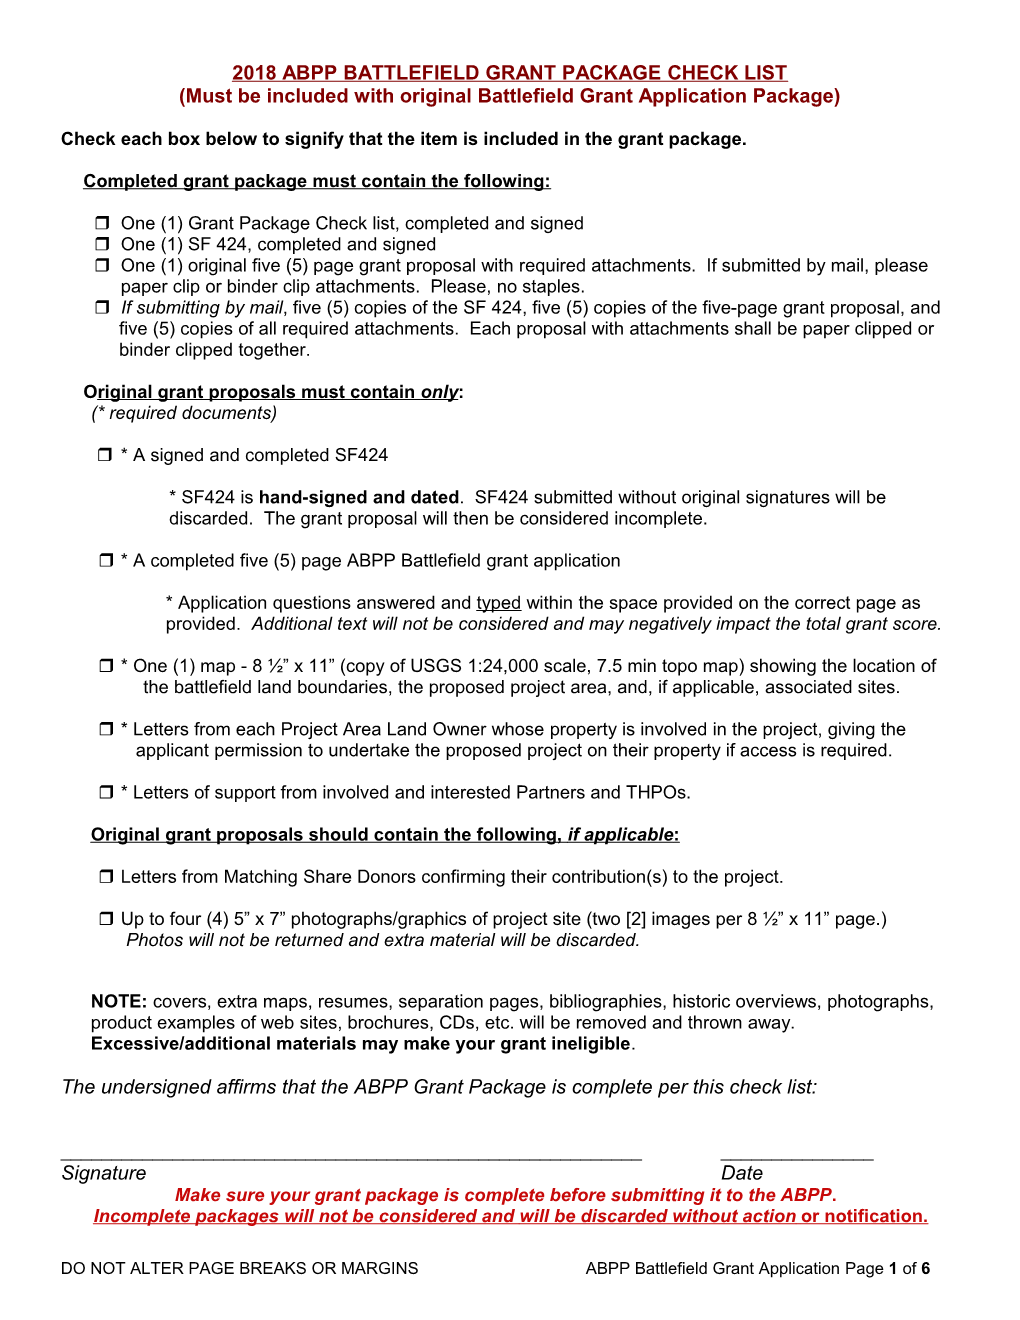 Department of the Interior - Standard Form 424